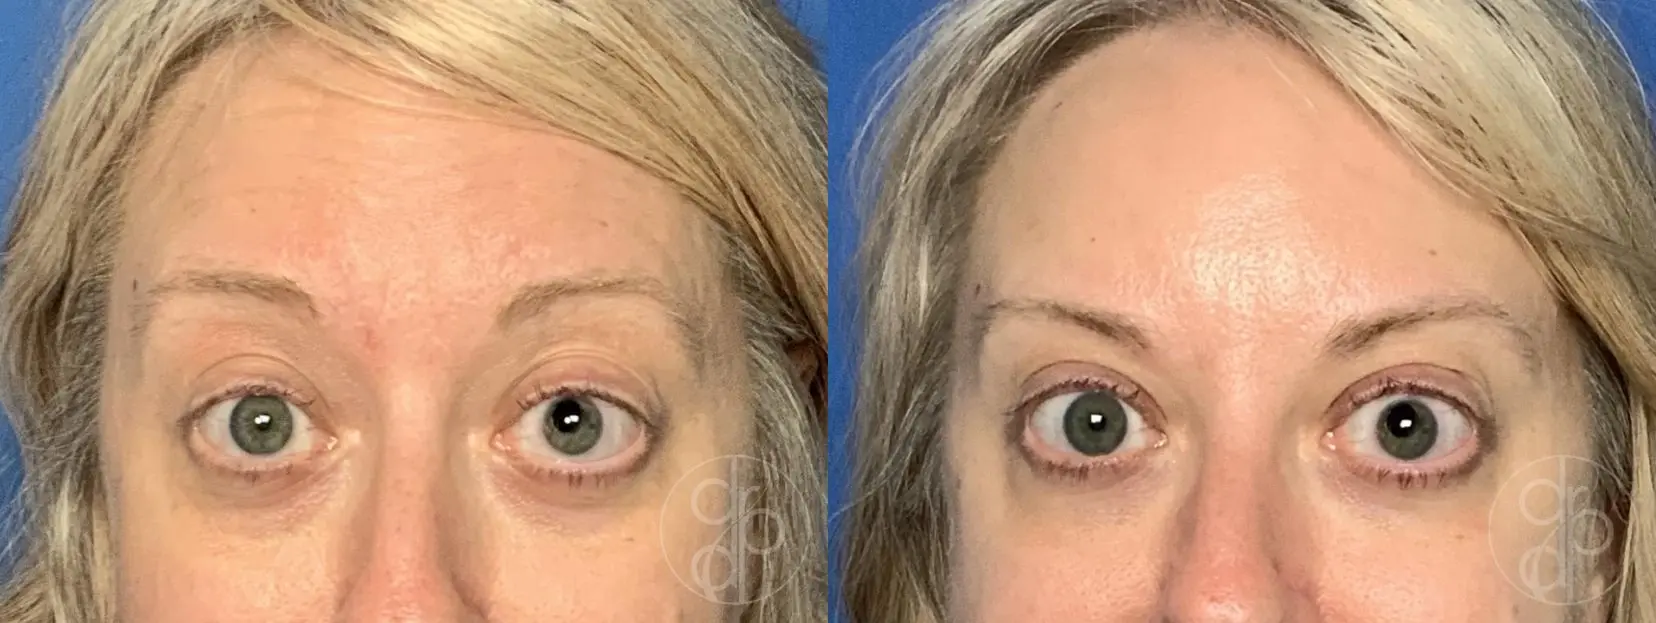 patient 14169 injectables before and after result - Before and After 2